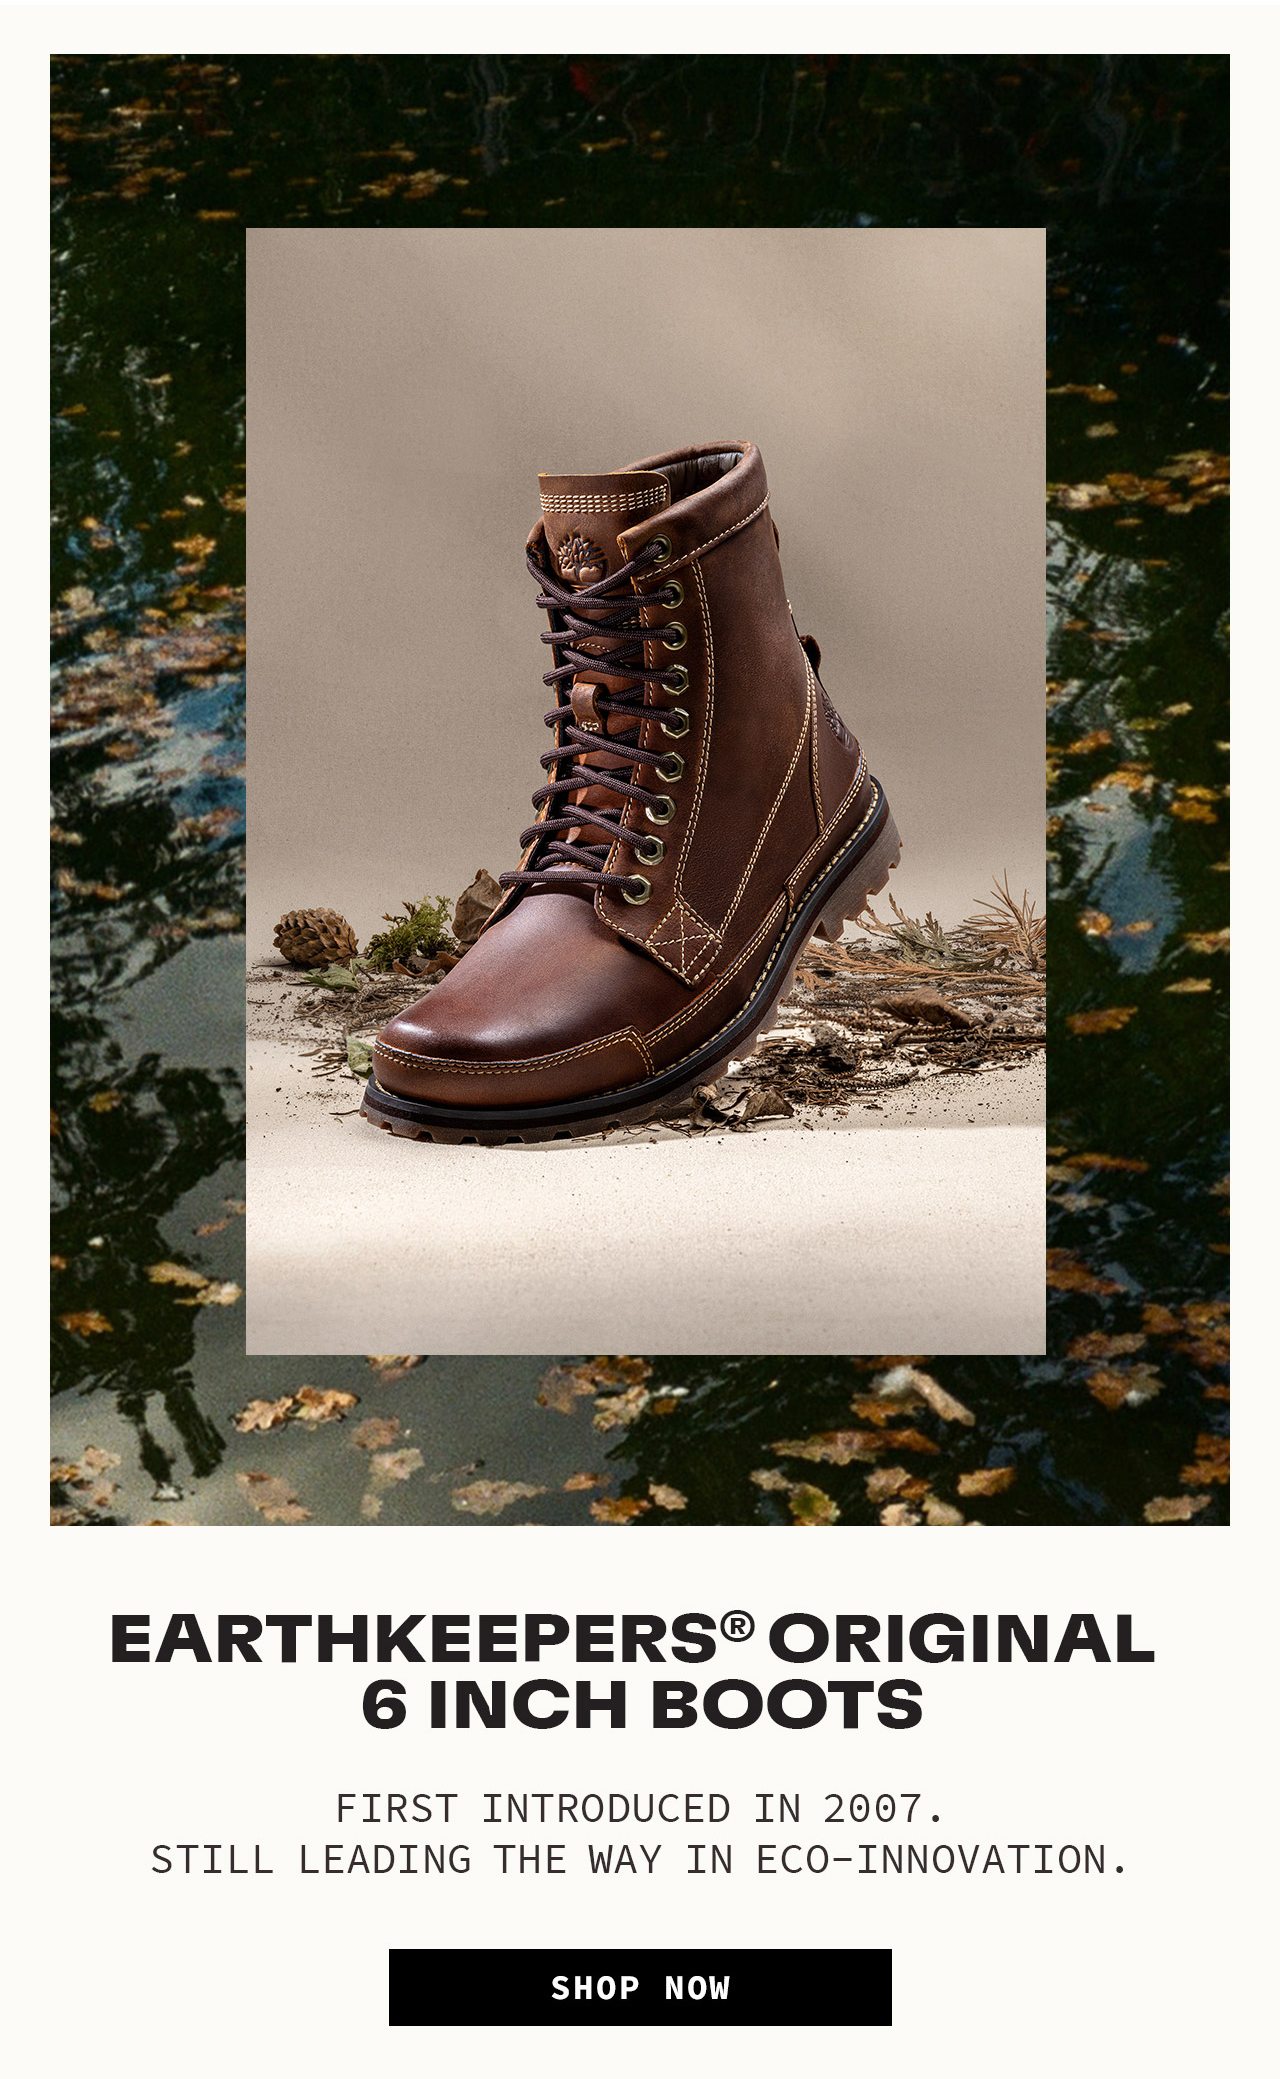 Earthkeepers Original 6 Inch Boots